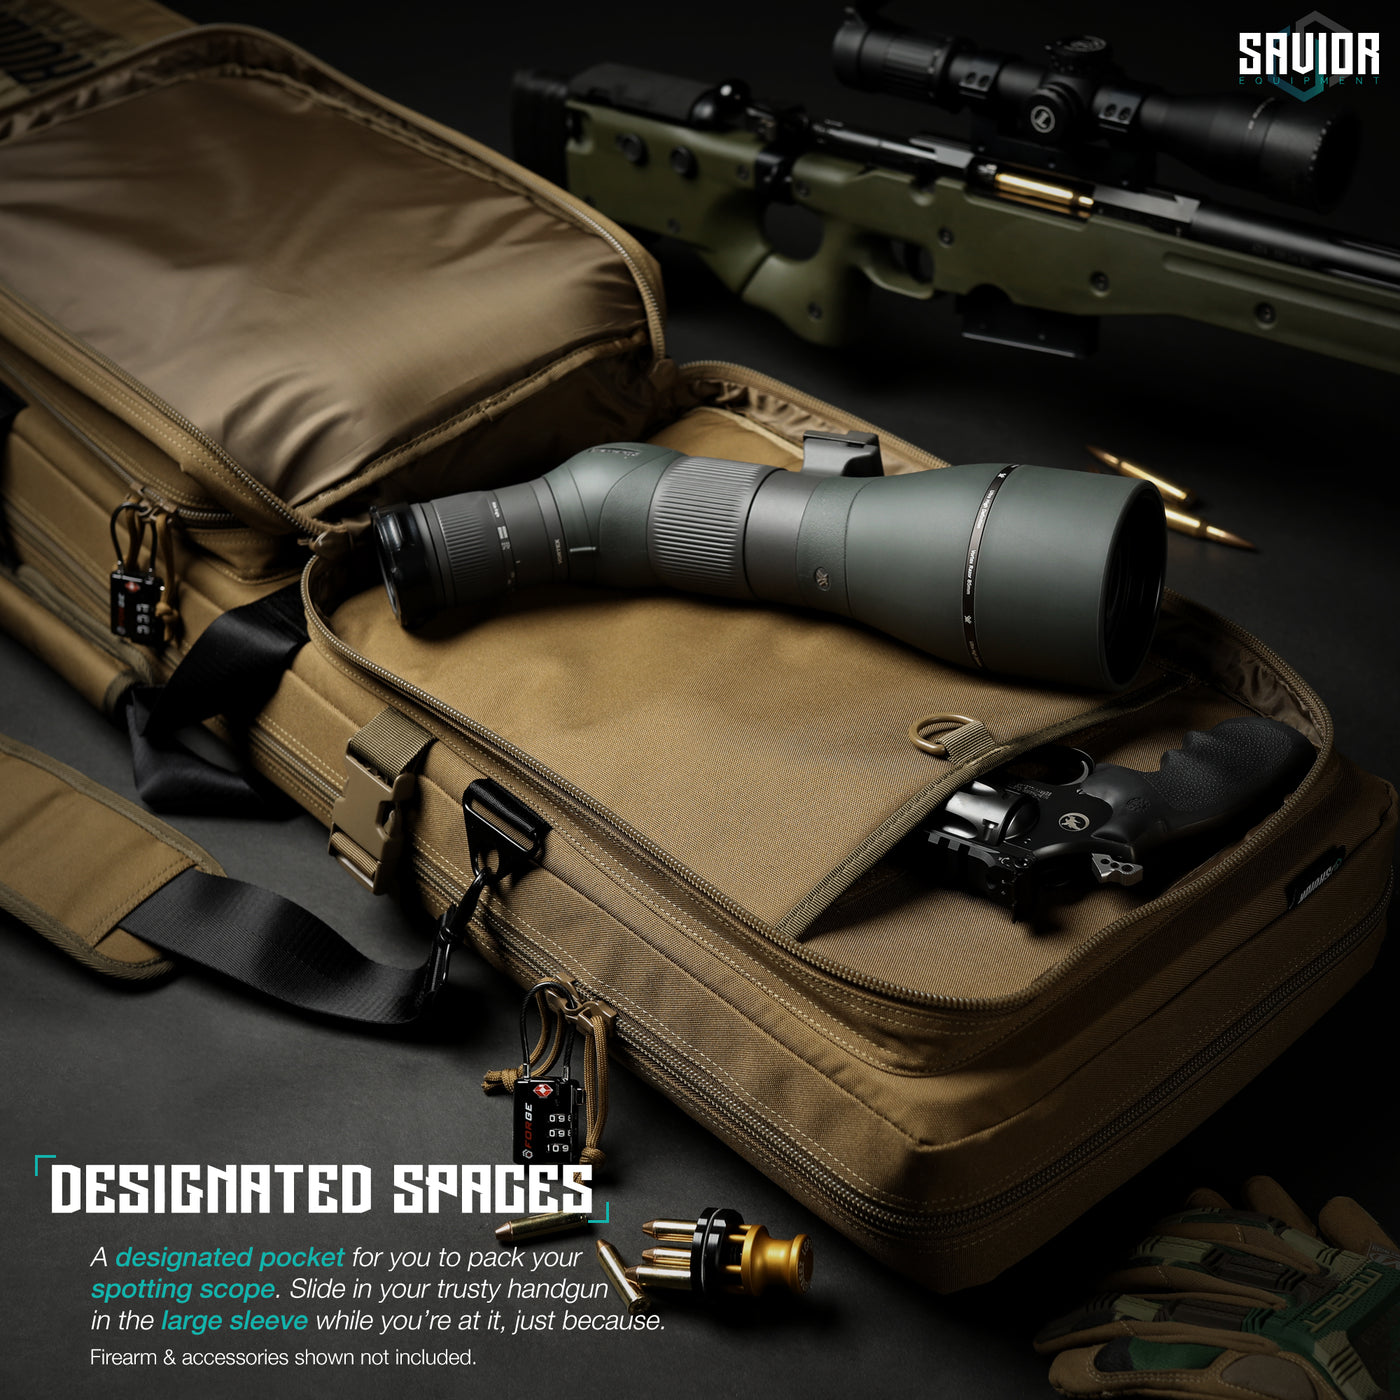 Designated Spaces - A designated pocket for you to pack your spotting scope. Slide in your trusty handgun in the large sleeve while you're at it, just because. Firearms & accessories shown not included.